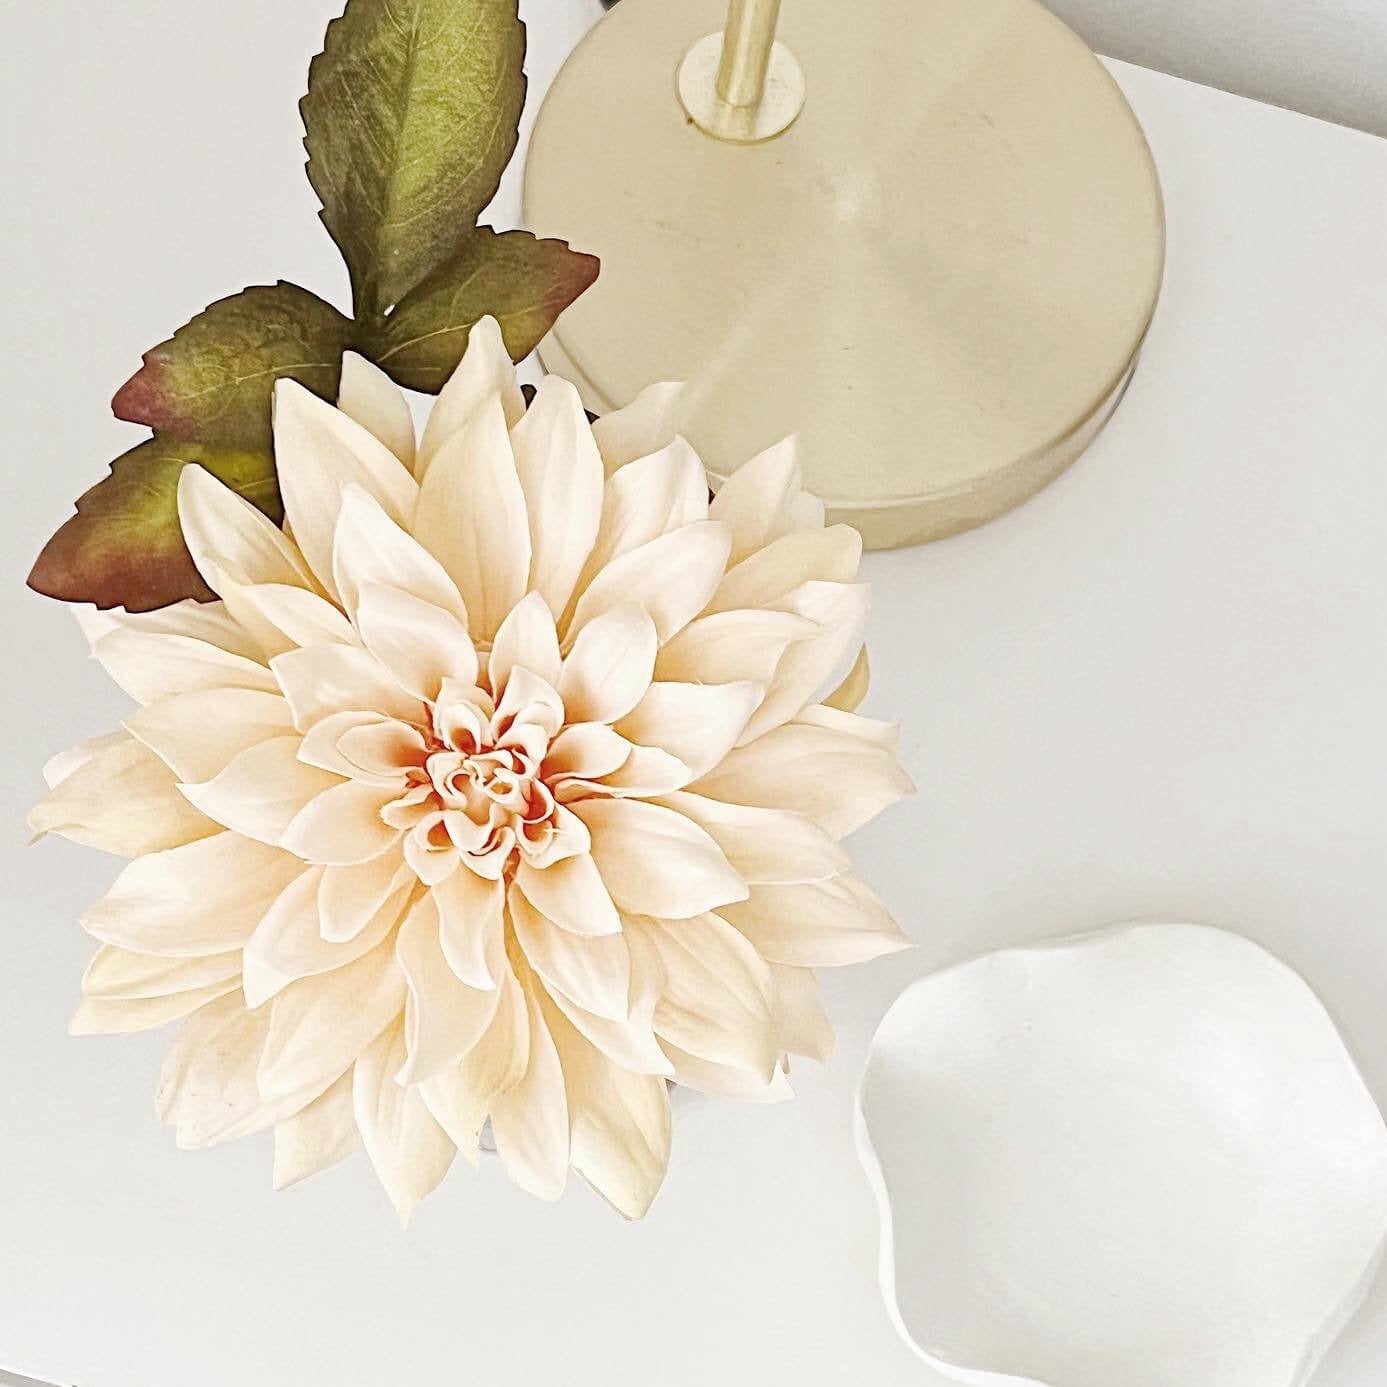 Dahlia flower in vase with perfume for home fragrance